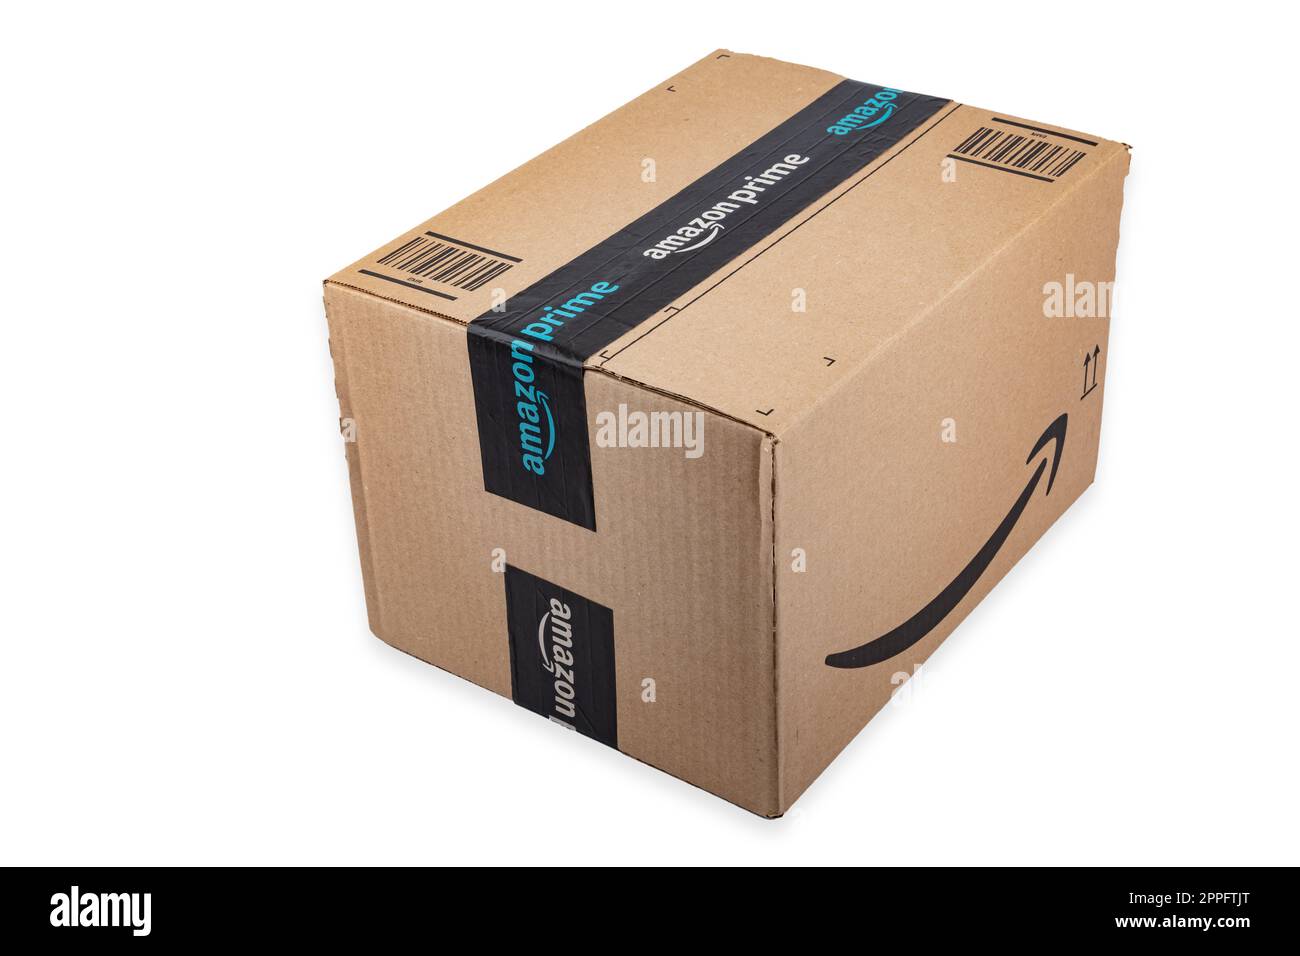 Parcel from Amazon Prime Stock Photo